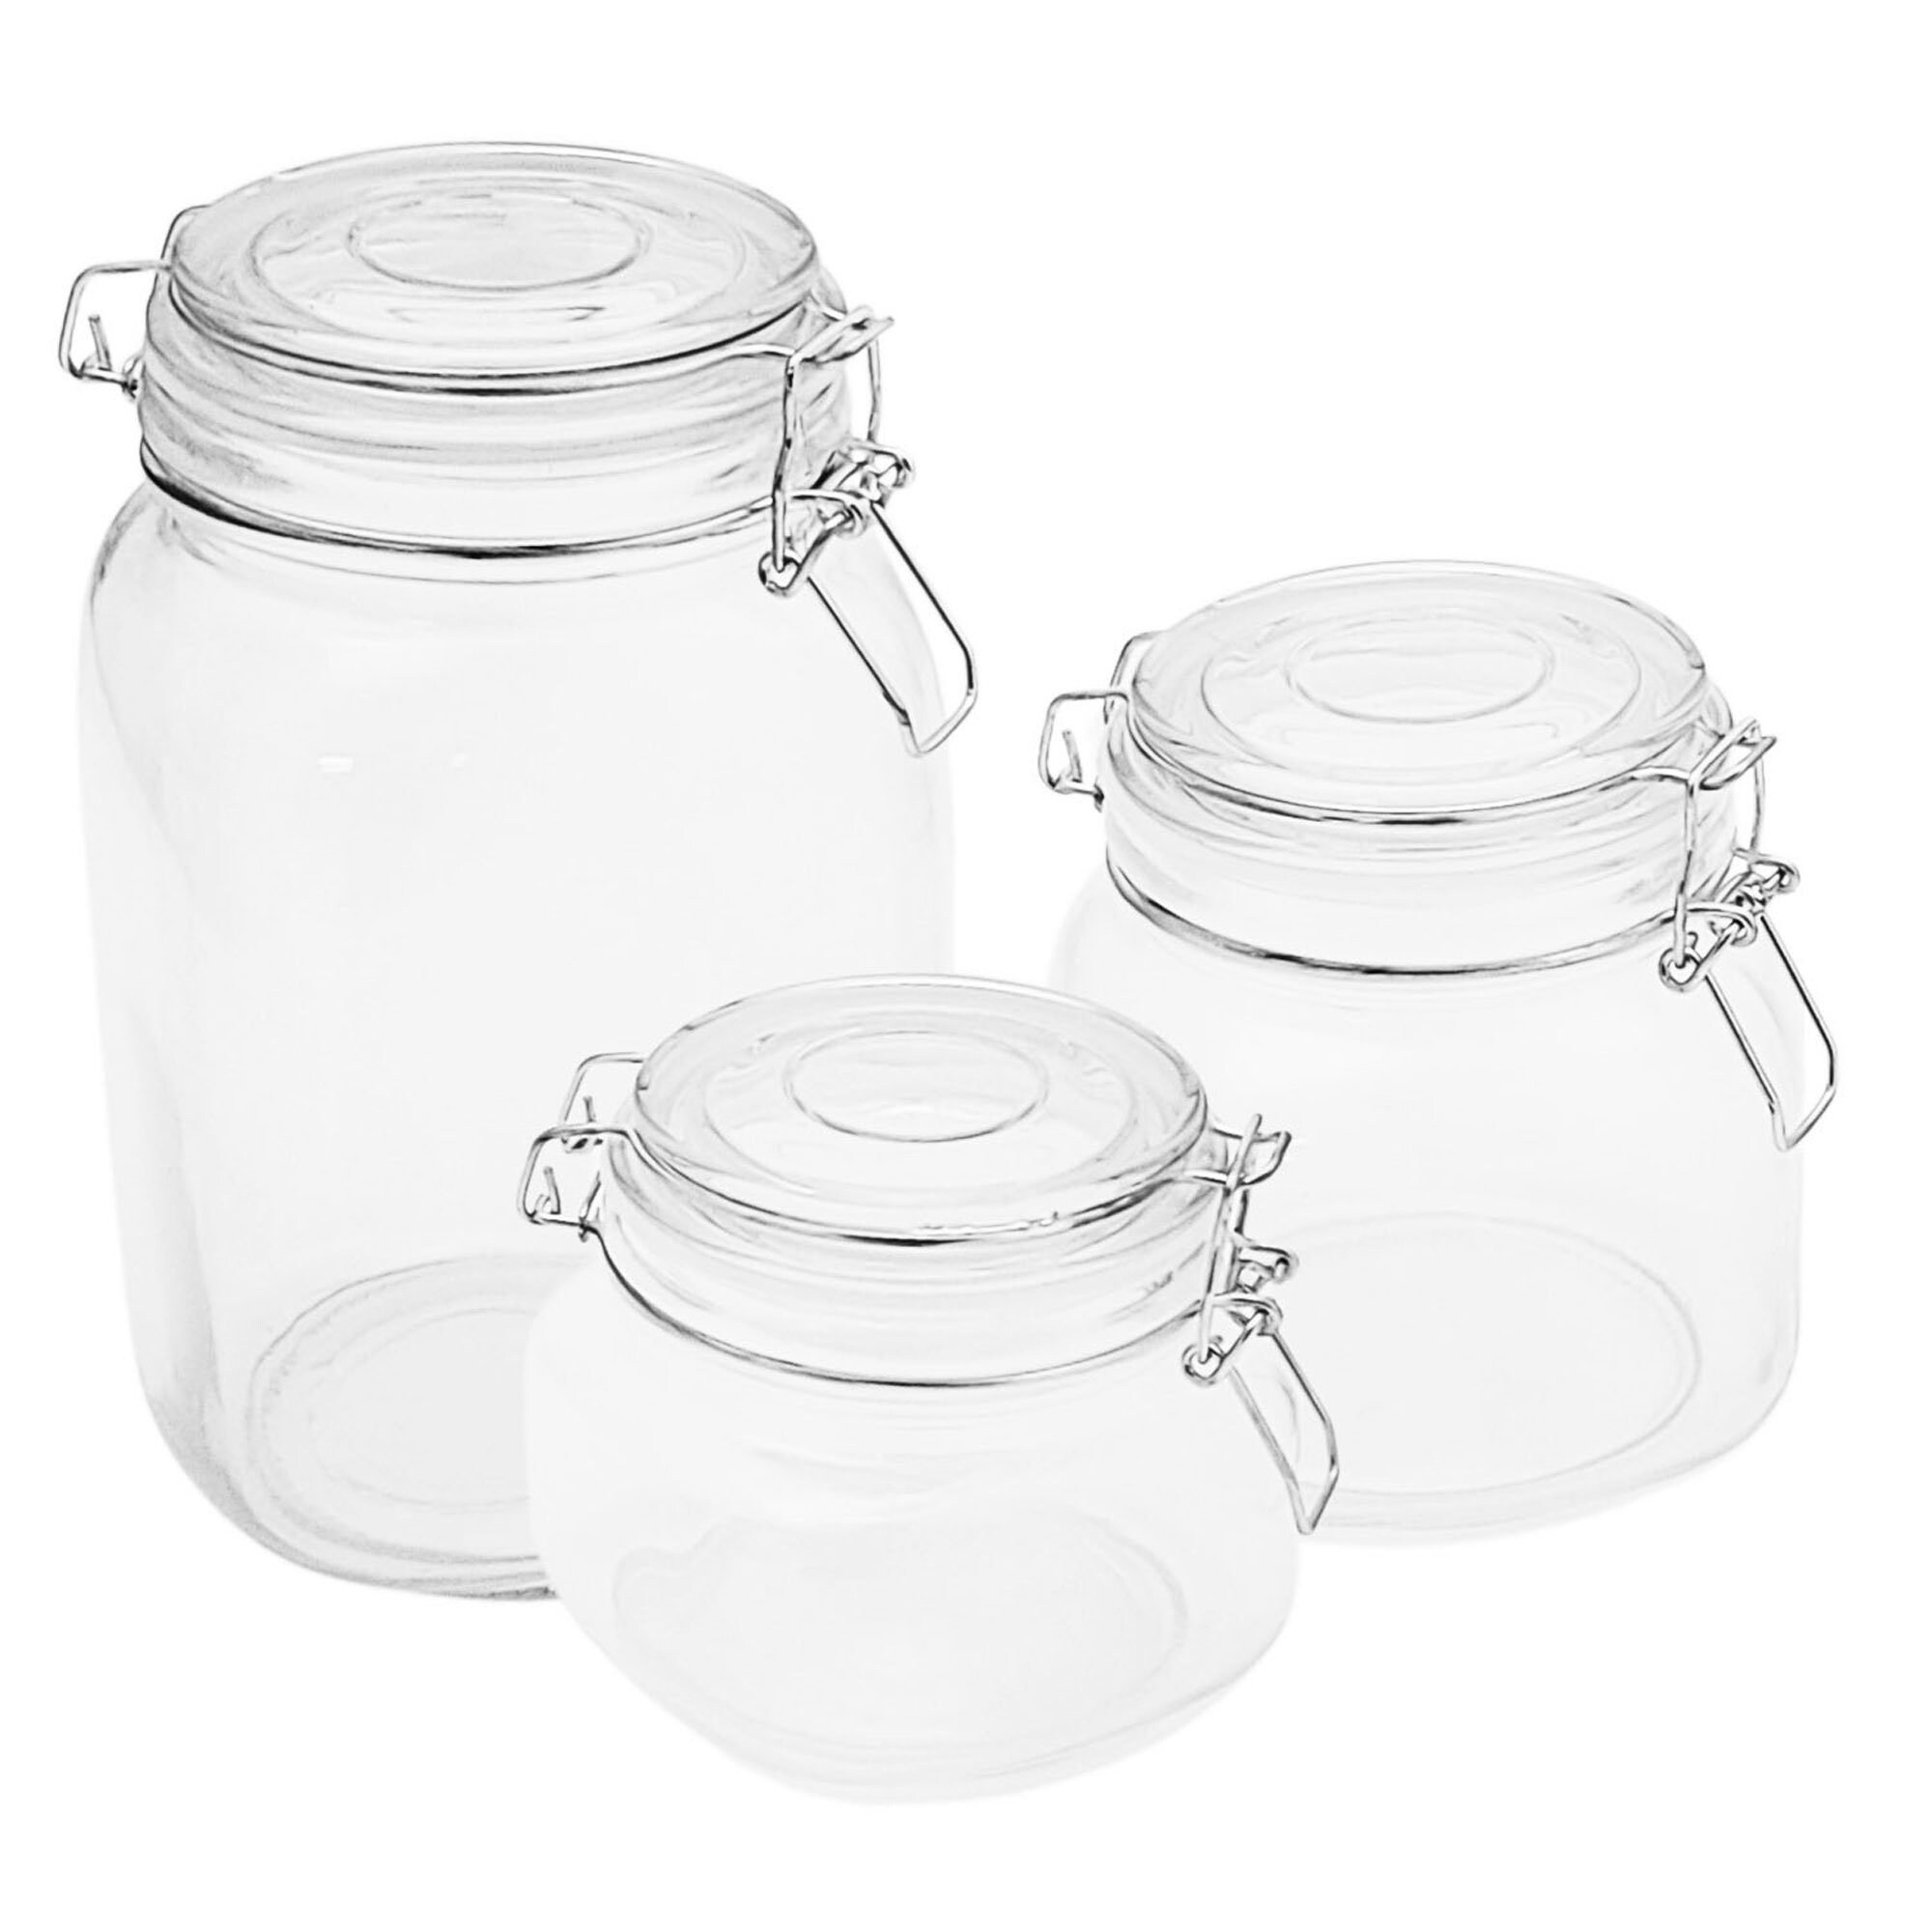 https://ak1.ostkcdn.com/images/products/is/images/direct/1c3848bb2a4fd2bbbd20ab3dfcdf200827023dbf/Glass-Storage-Jar-Kitchen-Container-Set-Swing-Top-Metal-Swing-Closure-Silicone-Seals-%283-Pieces%29.jpg